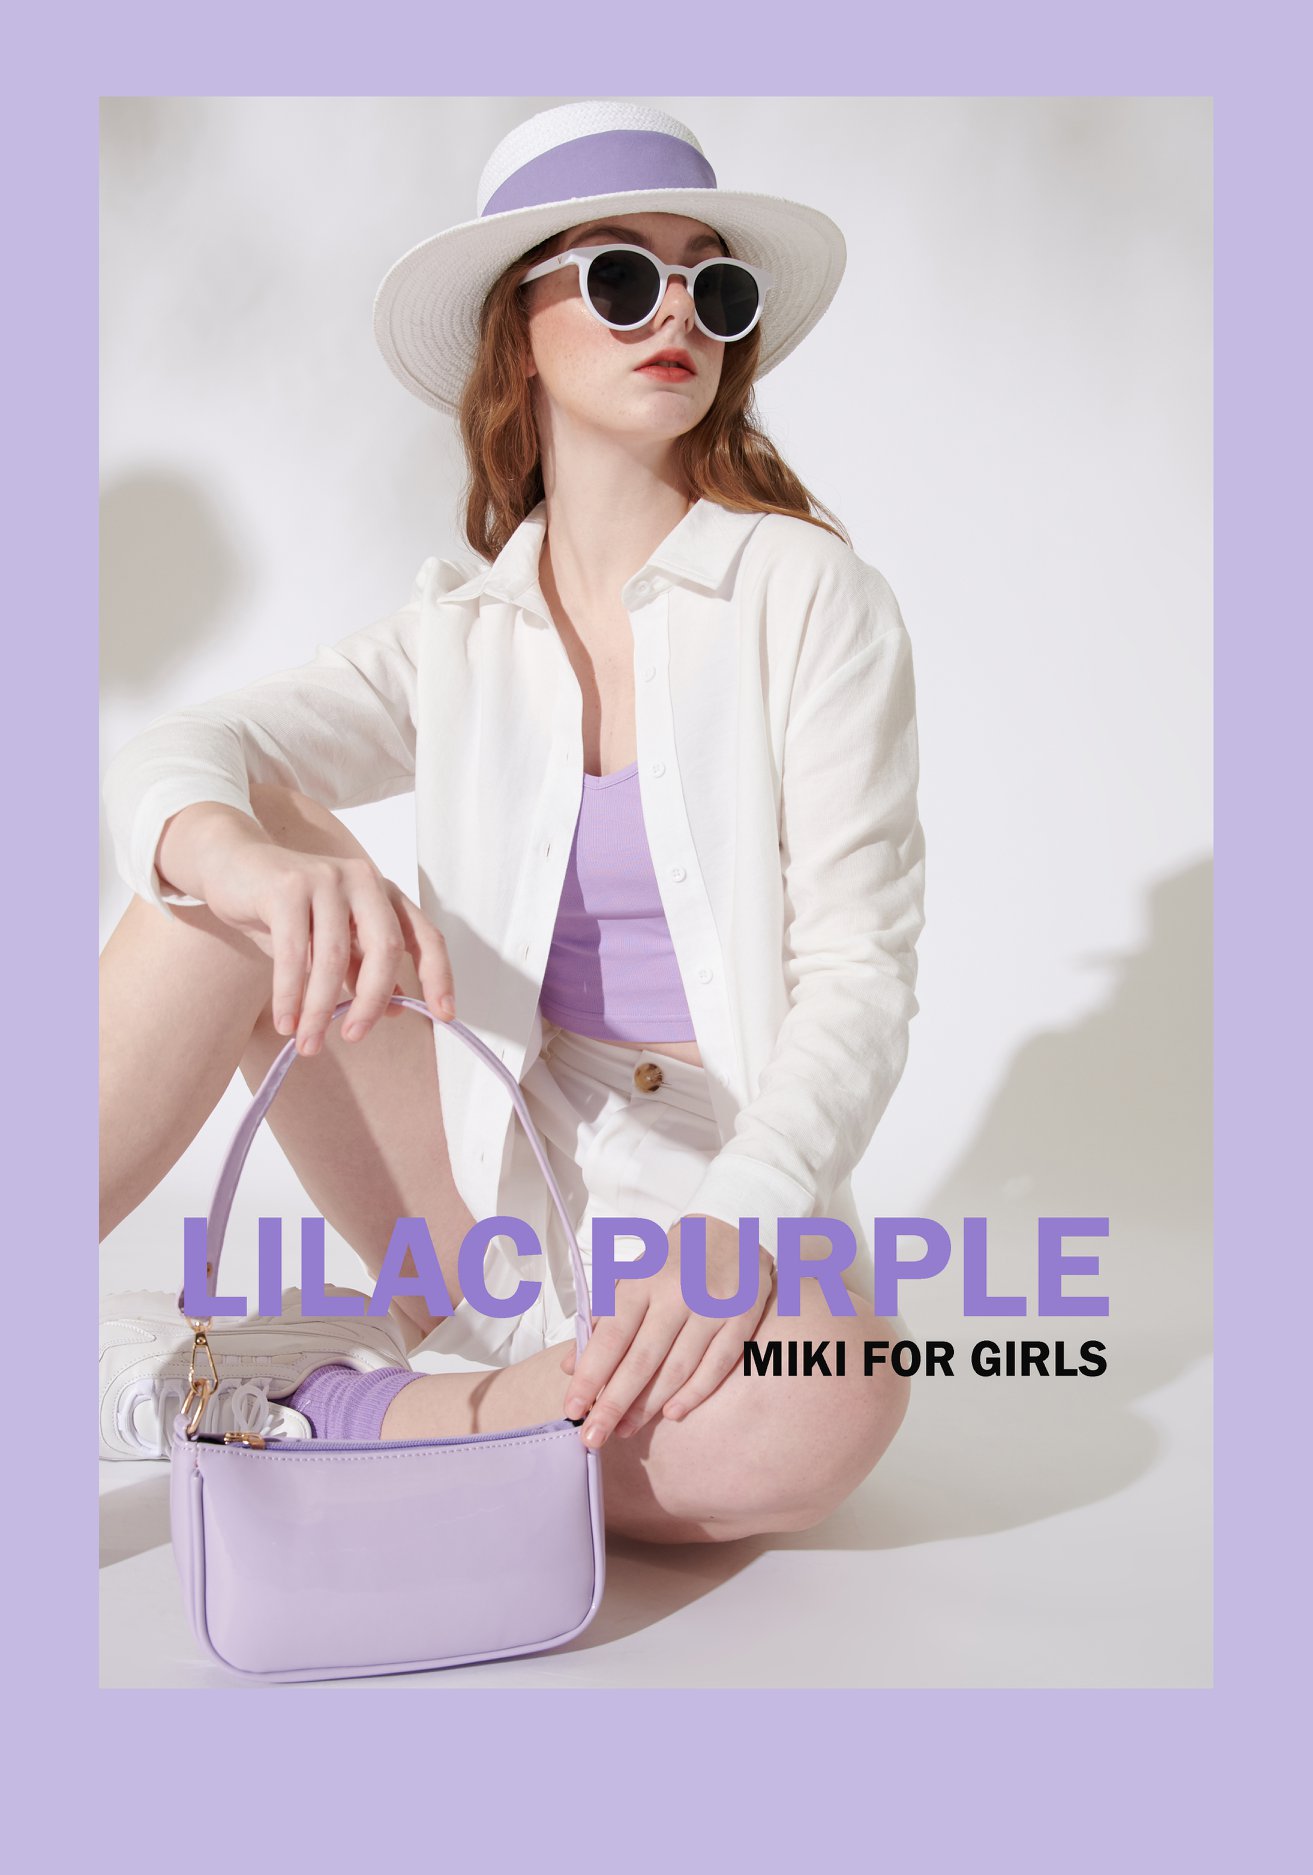 MIKI FOR GIRLS – LILAC PURPLE